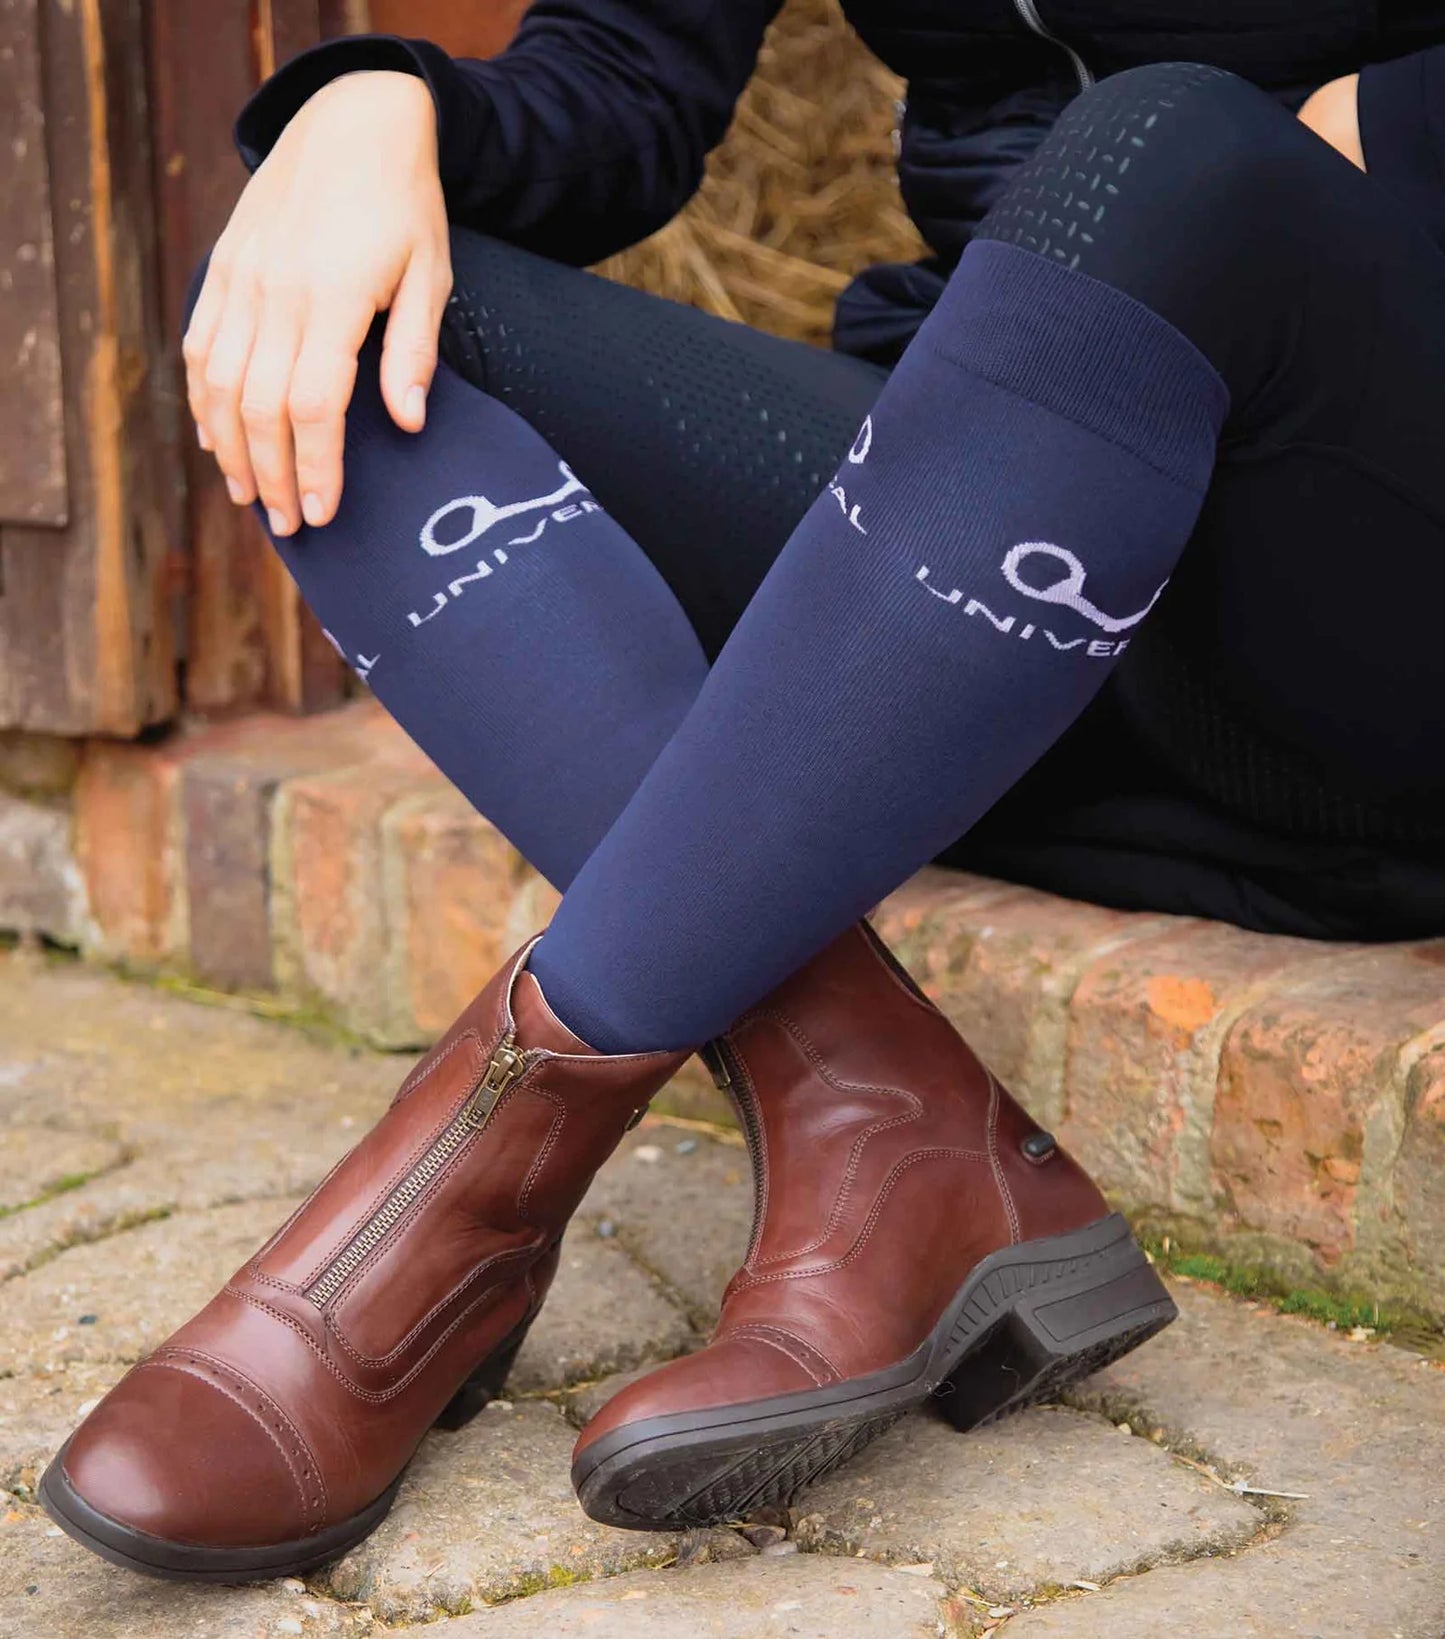 Premier Equine UK Adults Thin Stretch Riding Socks (2 Pairs) Navy